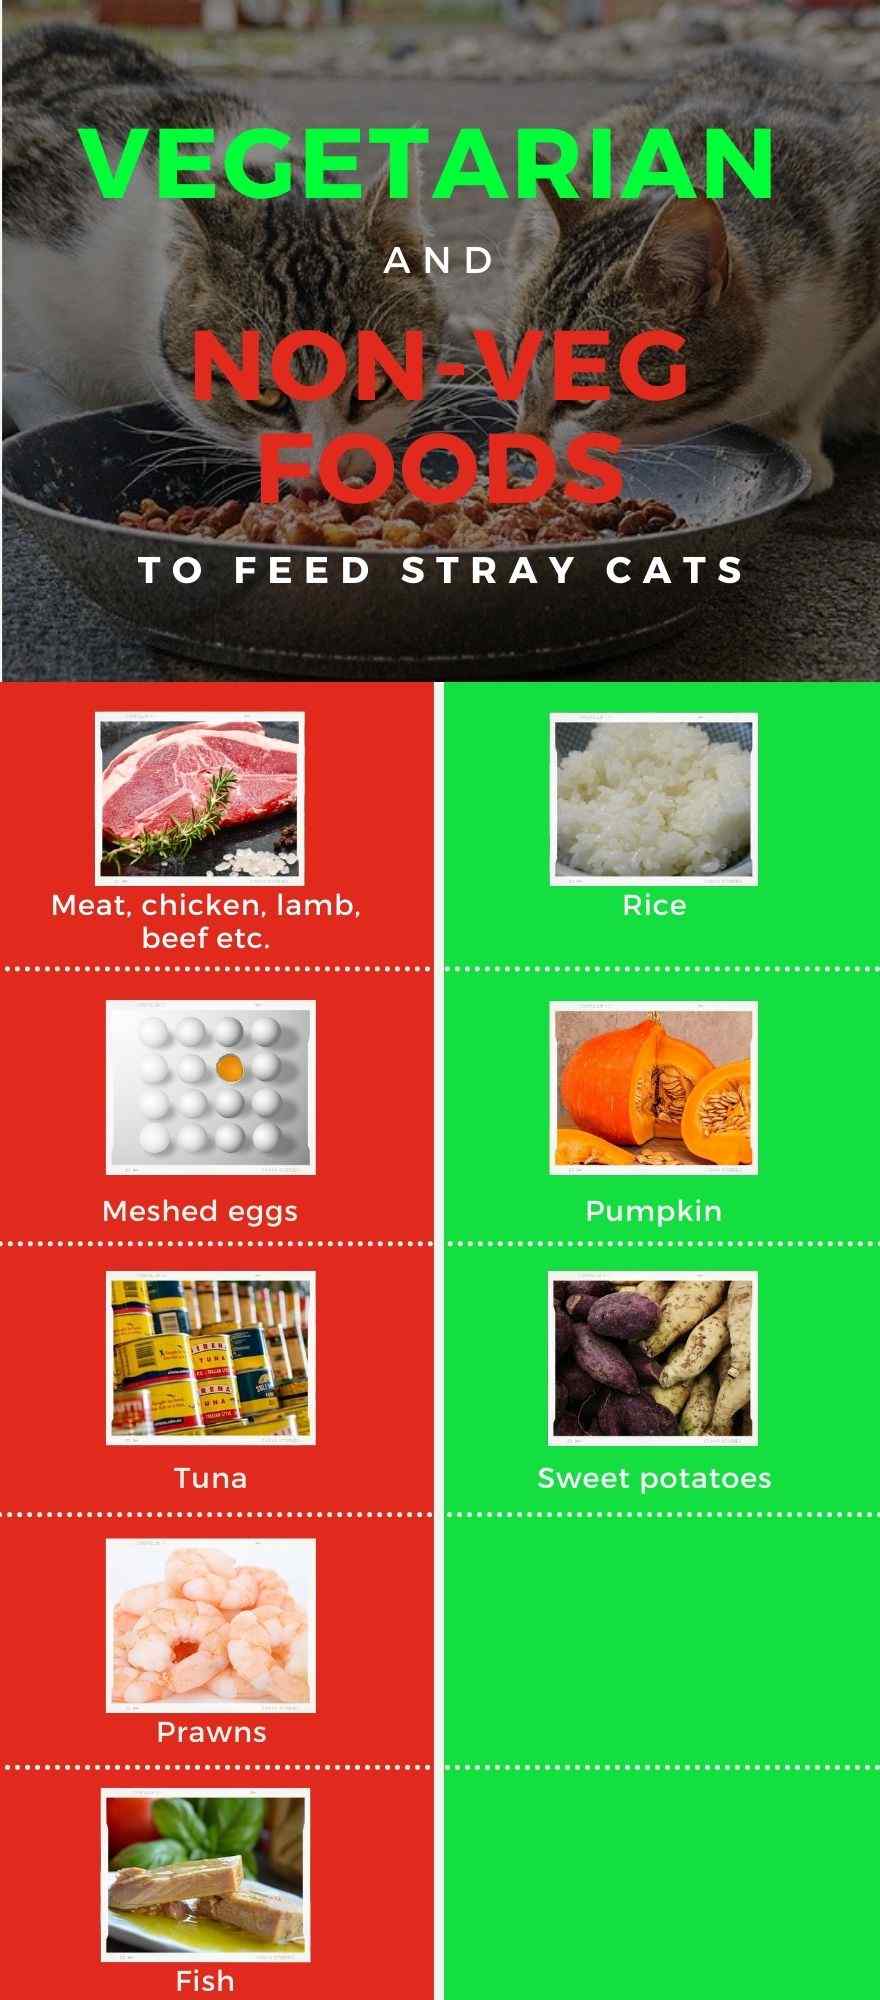 This infographic shows vegetarian and non-vegetarian foods that you can feed stray cats